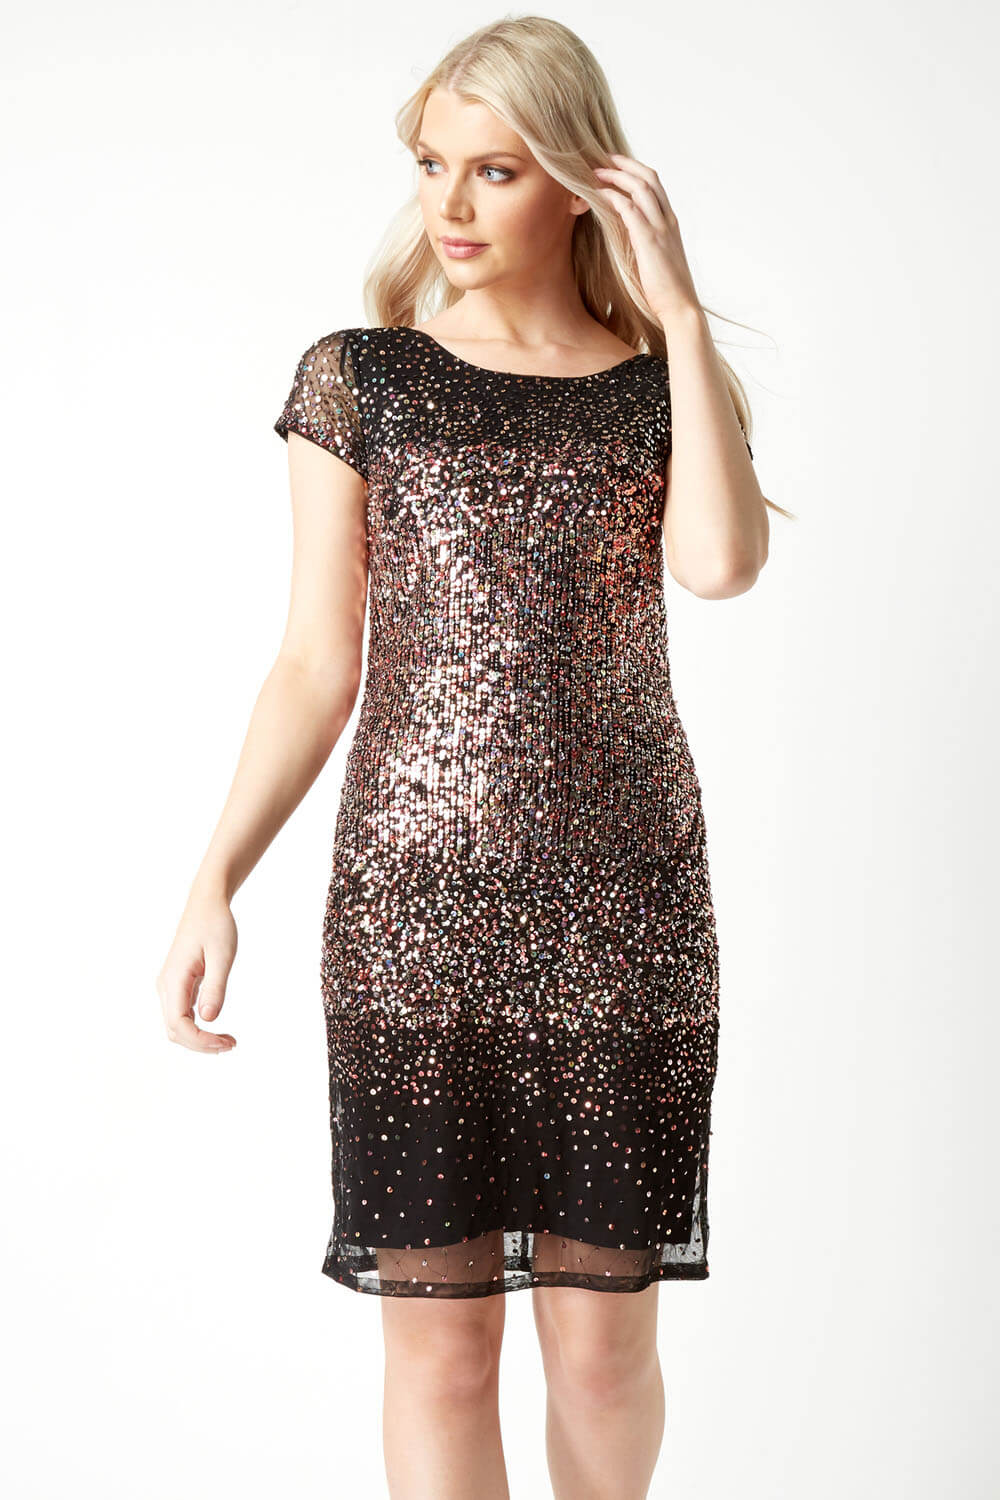 PINK Ombre Sequin Dress, Image 2 of 5